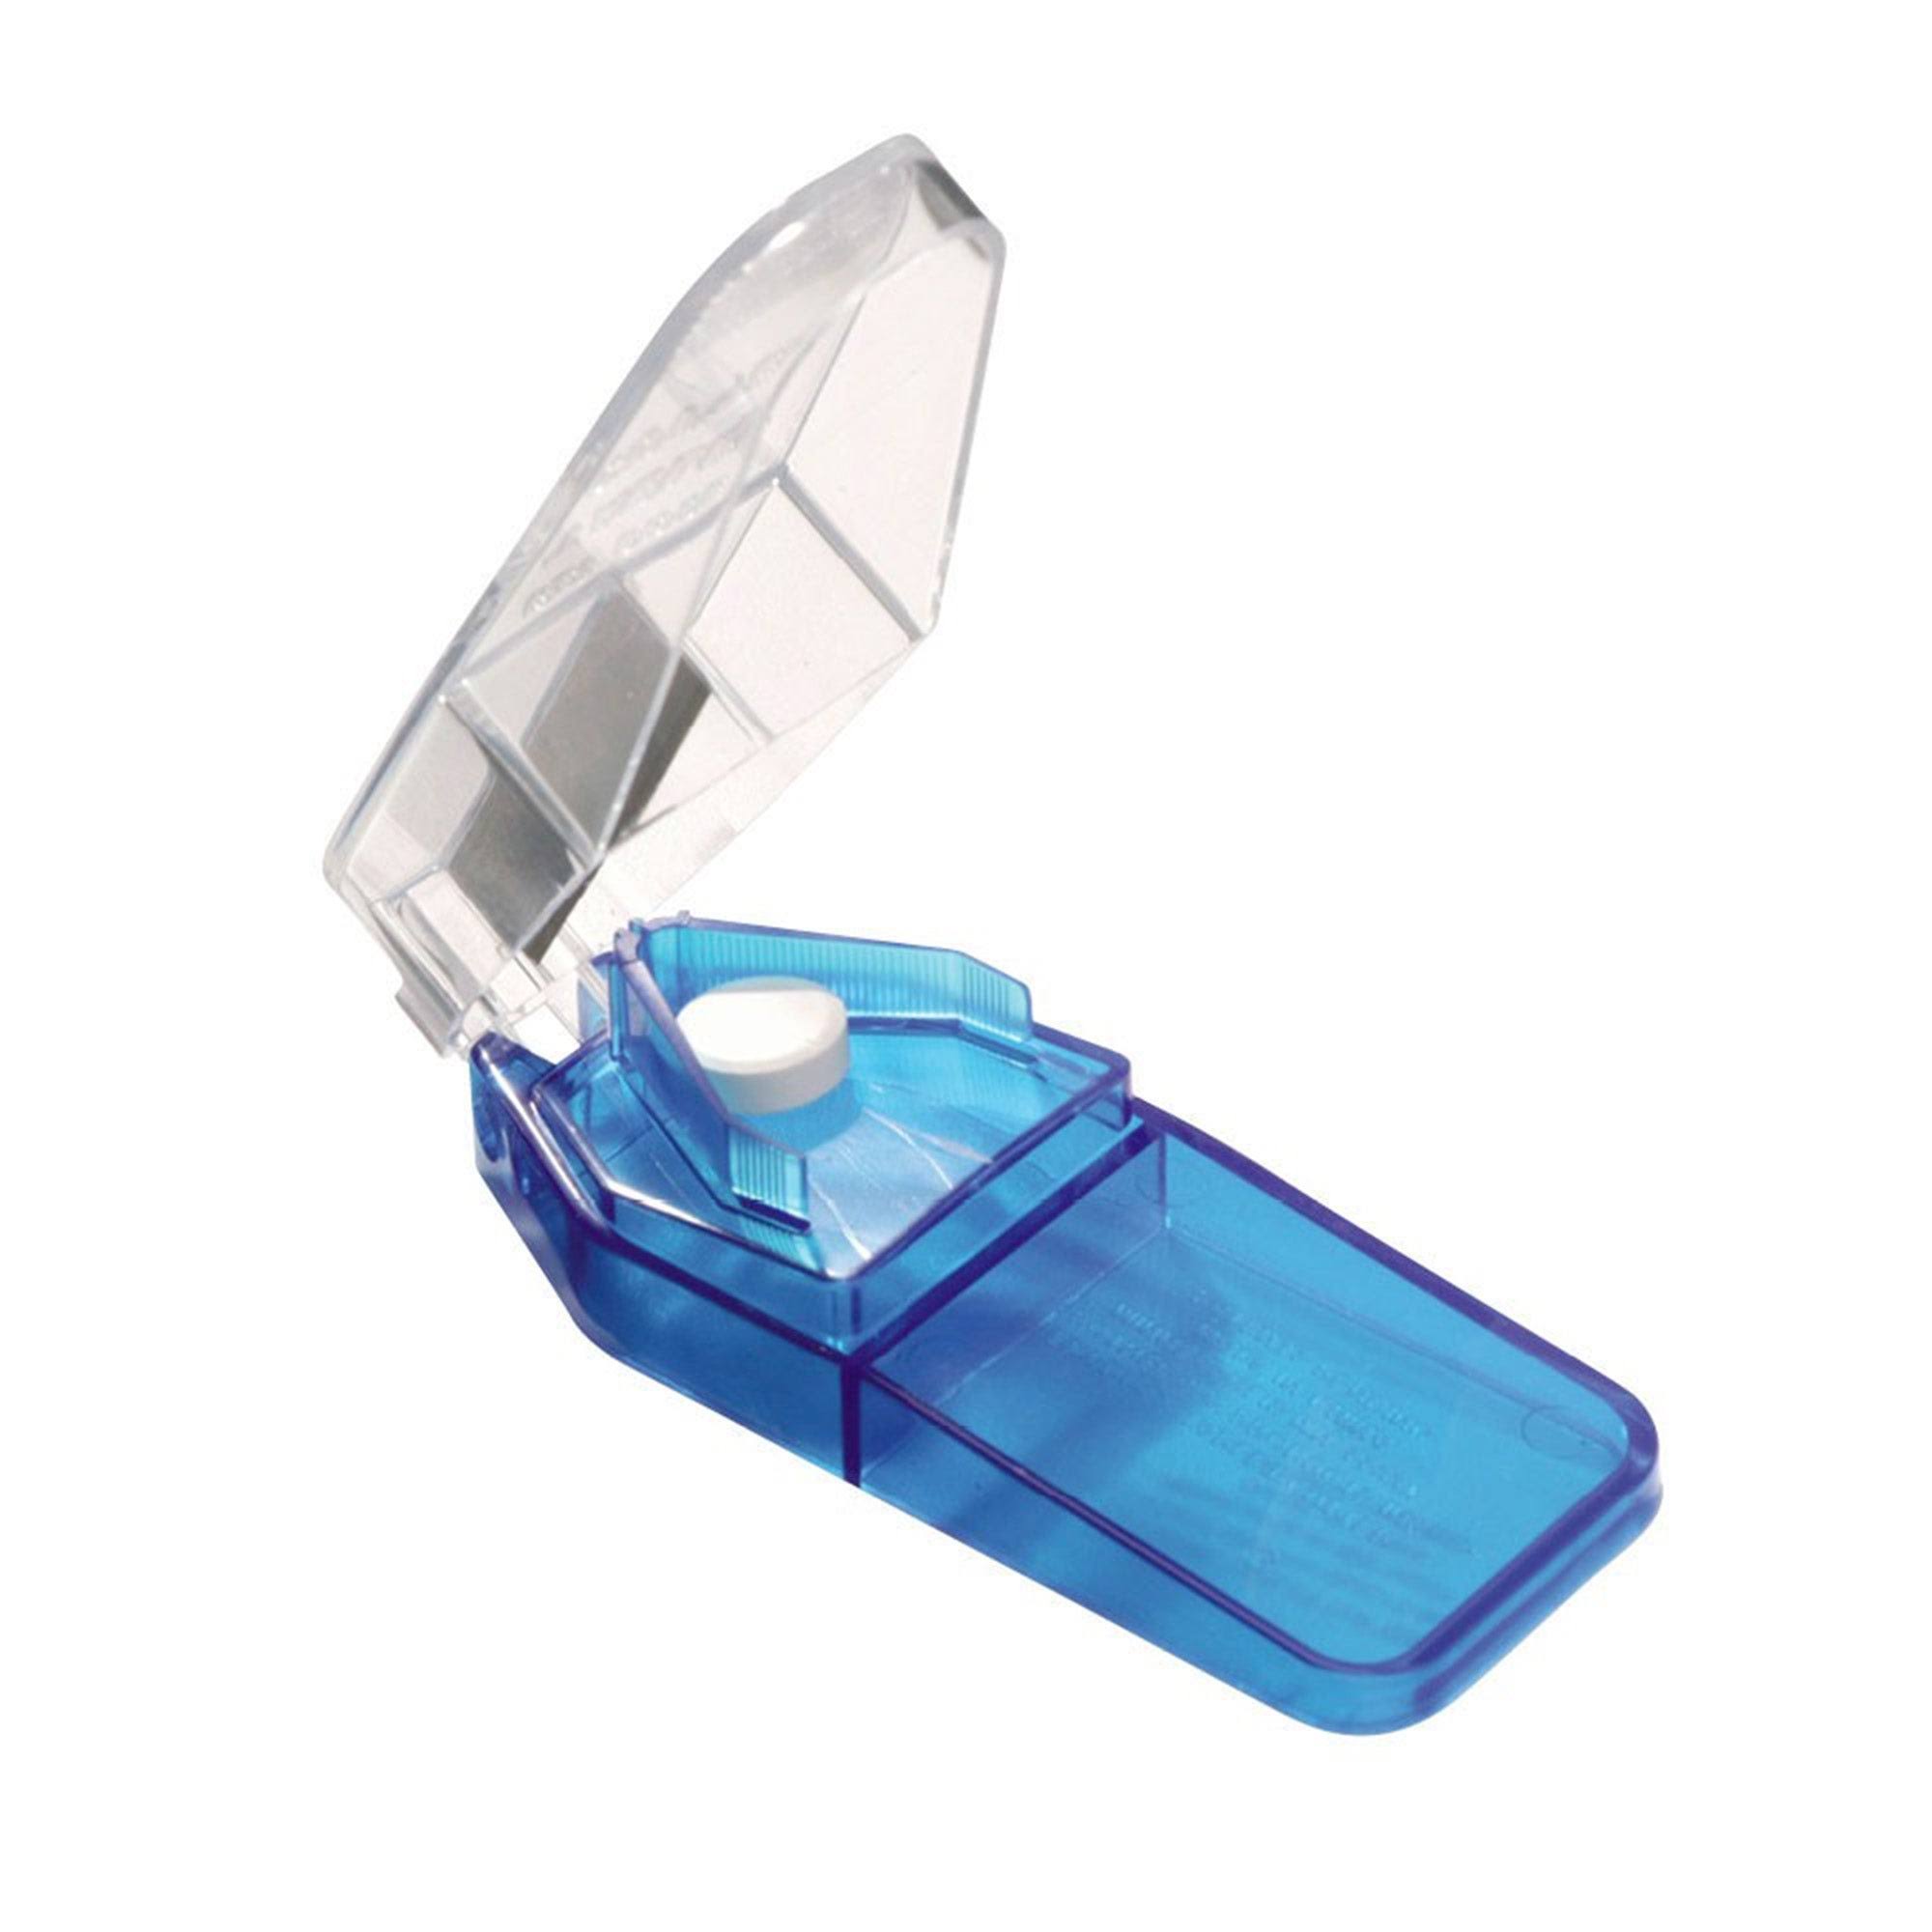 Ezy Dose Tablet Cutter